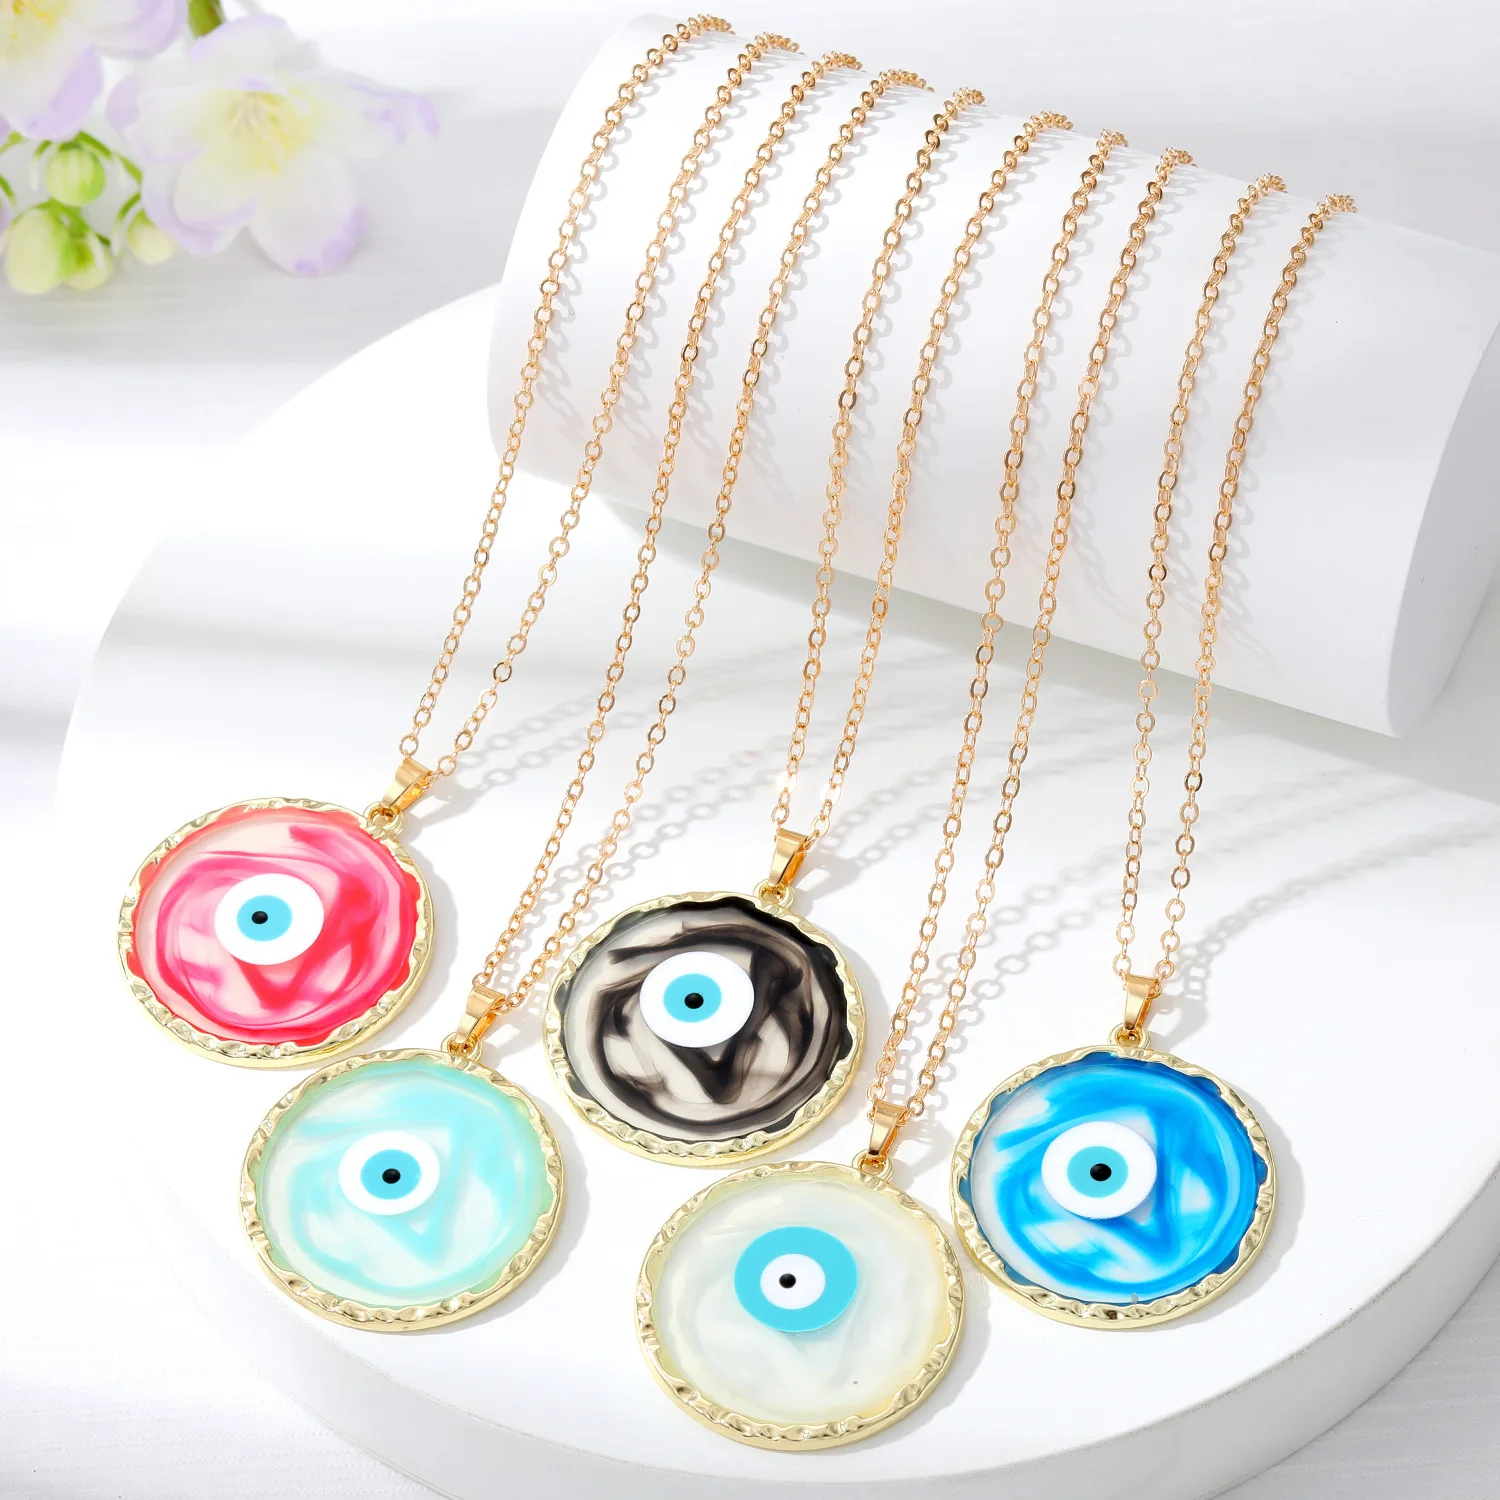 

20pcs Blooming Color Blue Evil Eye Pendant Necklaces for Women Gift Jewelry Turkish Blue Eye Sweater Clavicle Chain Necklace